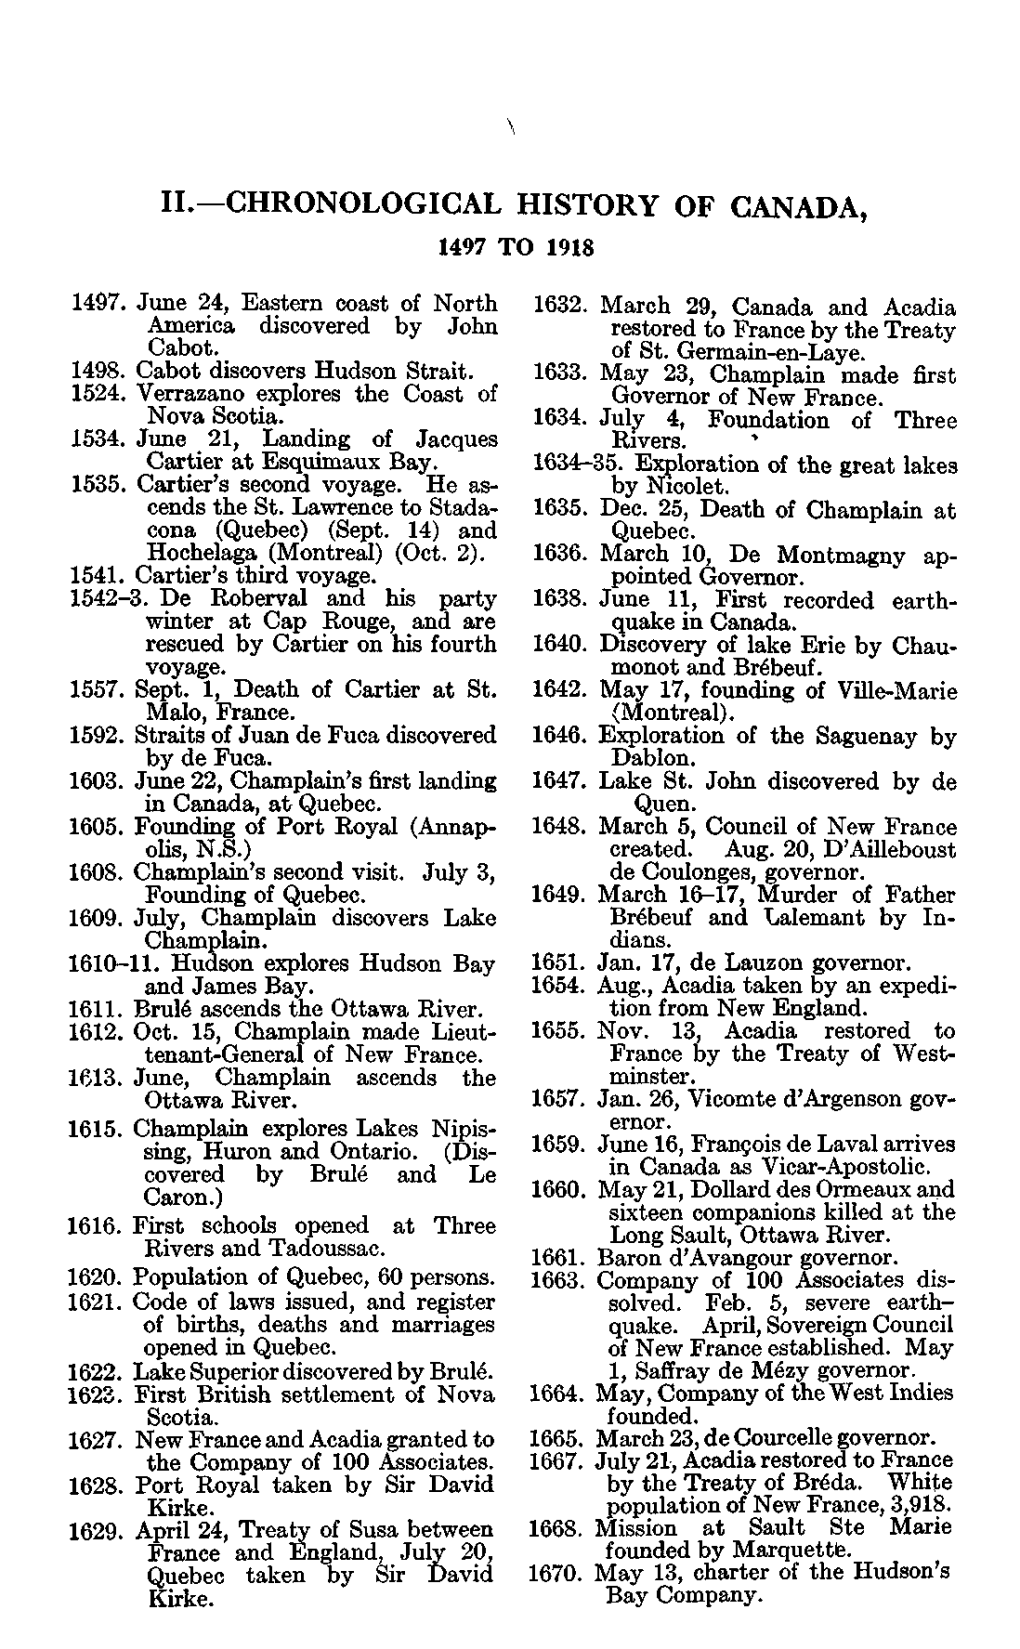 Chronological History of Canada, 1497-1918